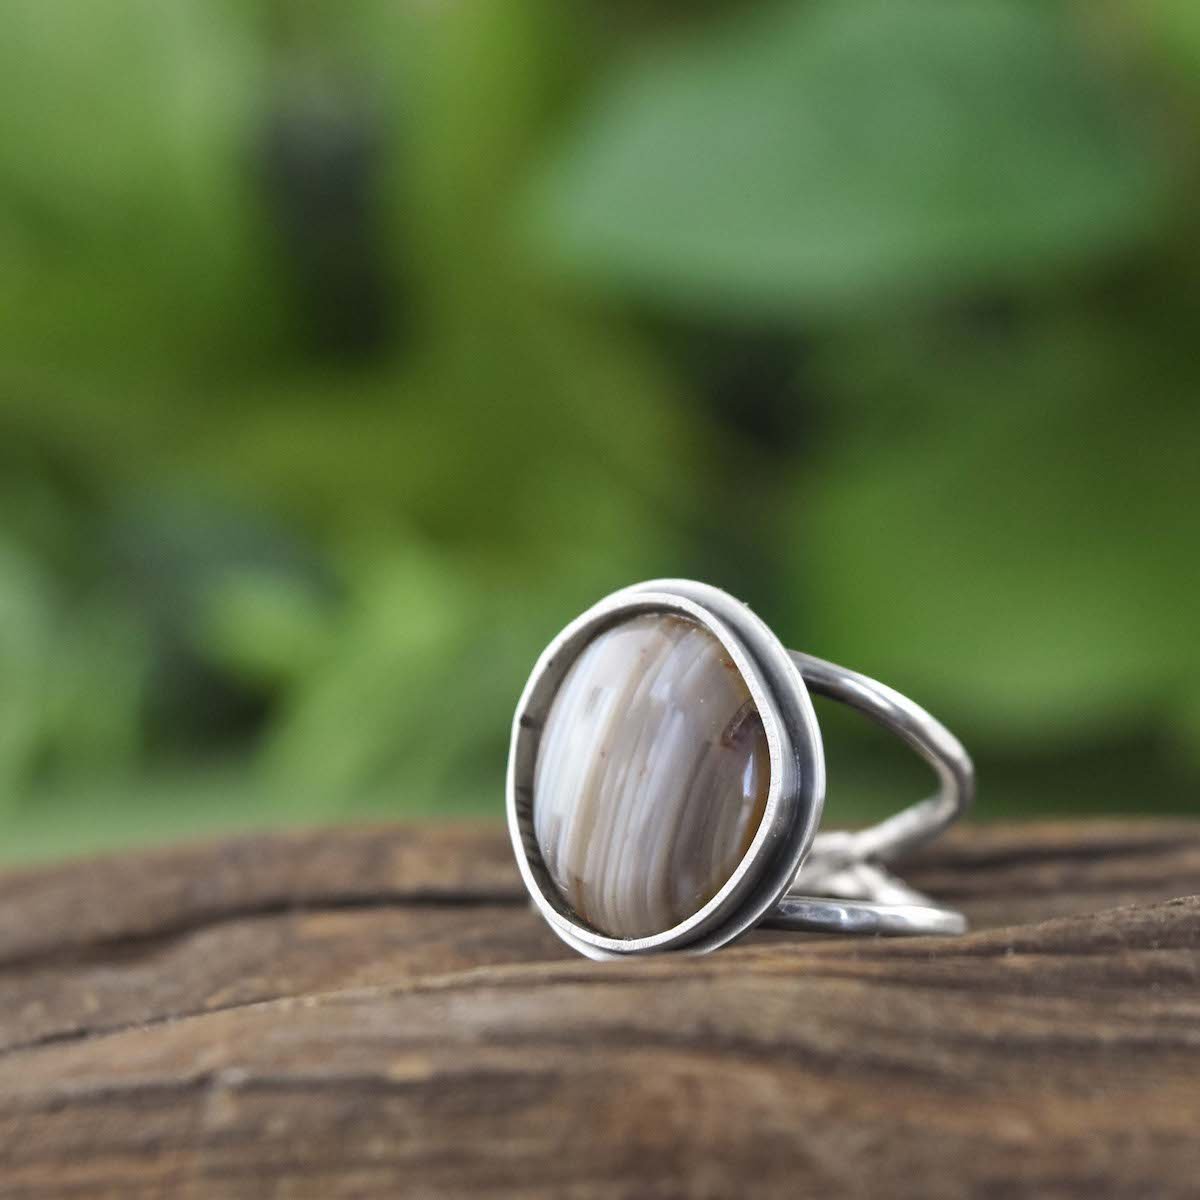 Lake Superior Agate Ring - Choose Your Own Stone - Ring  A. 14 x 16mm / Lake Superior Agate  B. 12mm / Lake Superior Agate 3218 - handmade by Beth Millner Jewelry